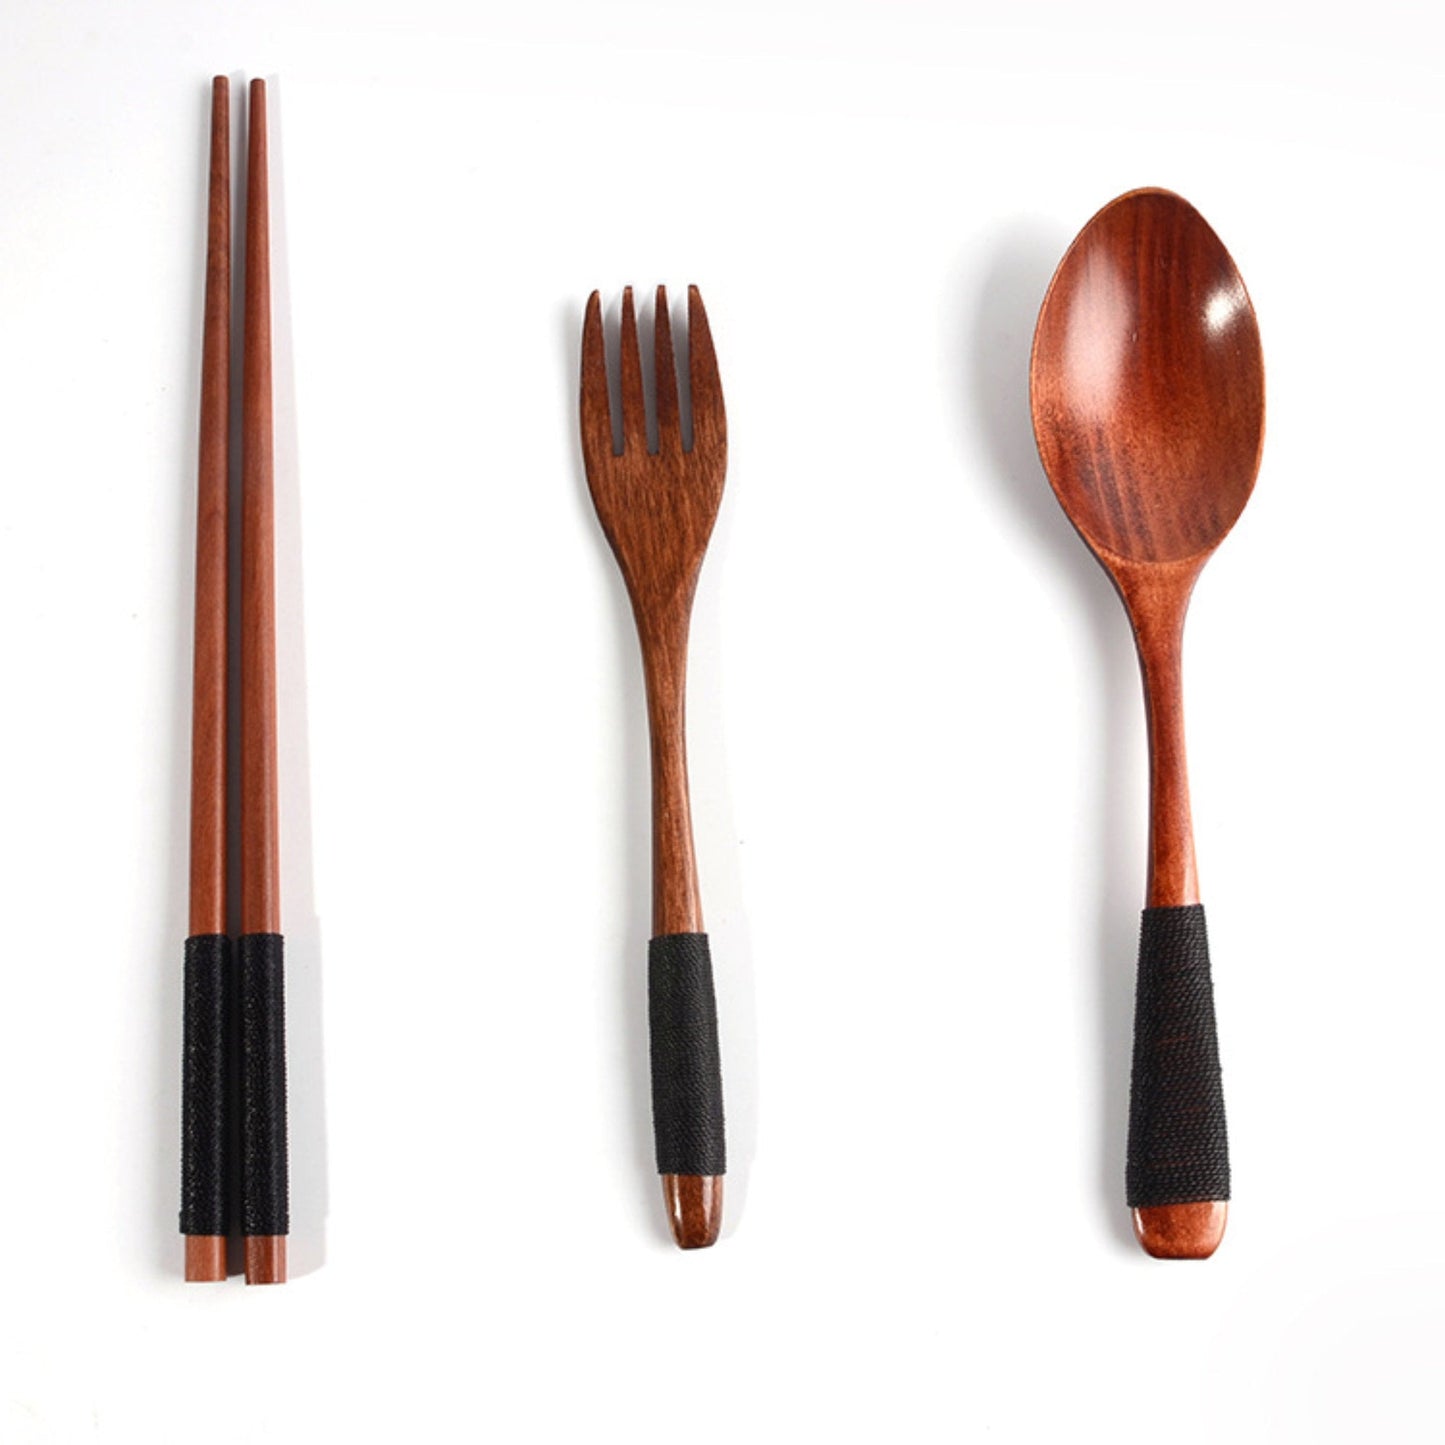 Japanese Wood Cooking Utensils With Case | Spoon Set, Natural wooden - -